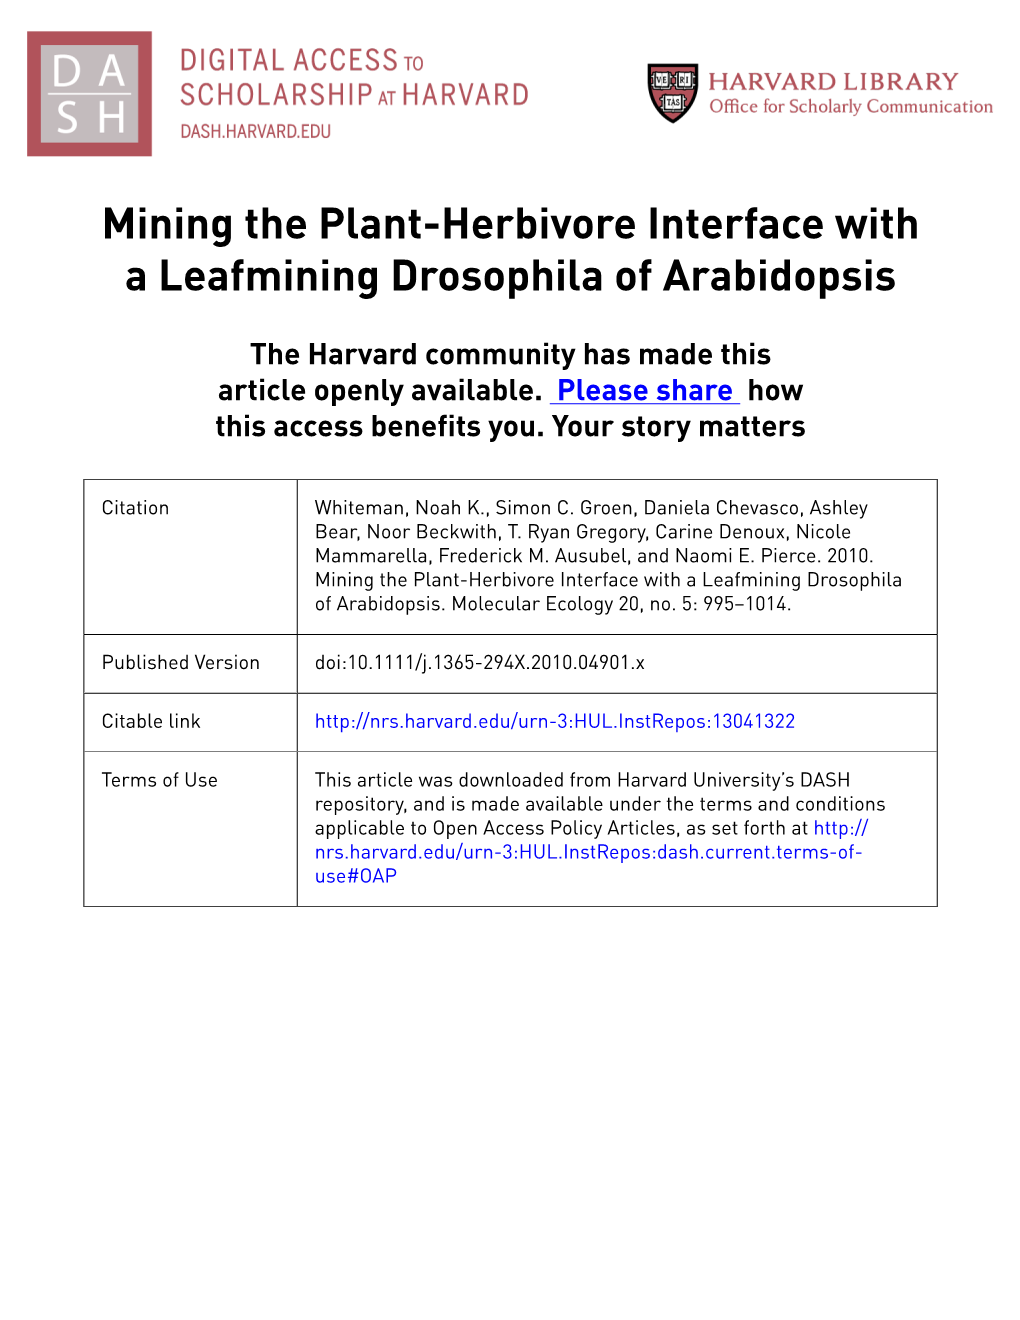 Mining the Plant-Herbivore Interface with a Leafmining Drosophila of Arabidopsis